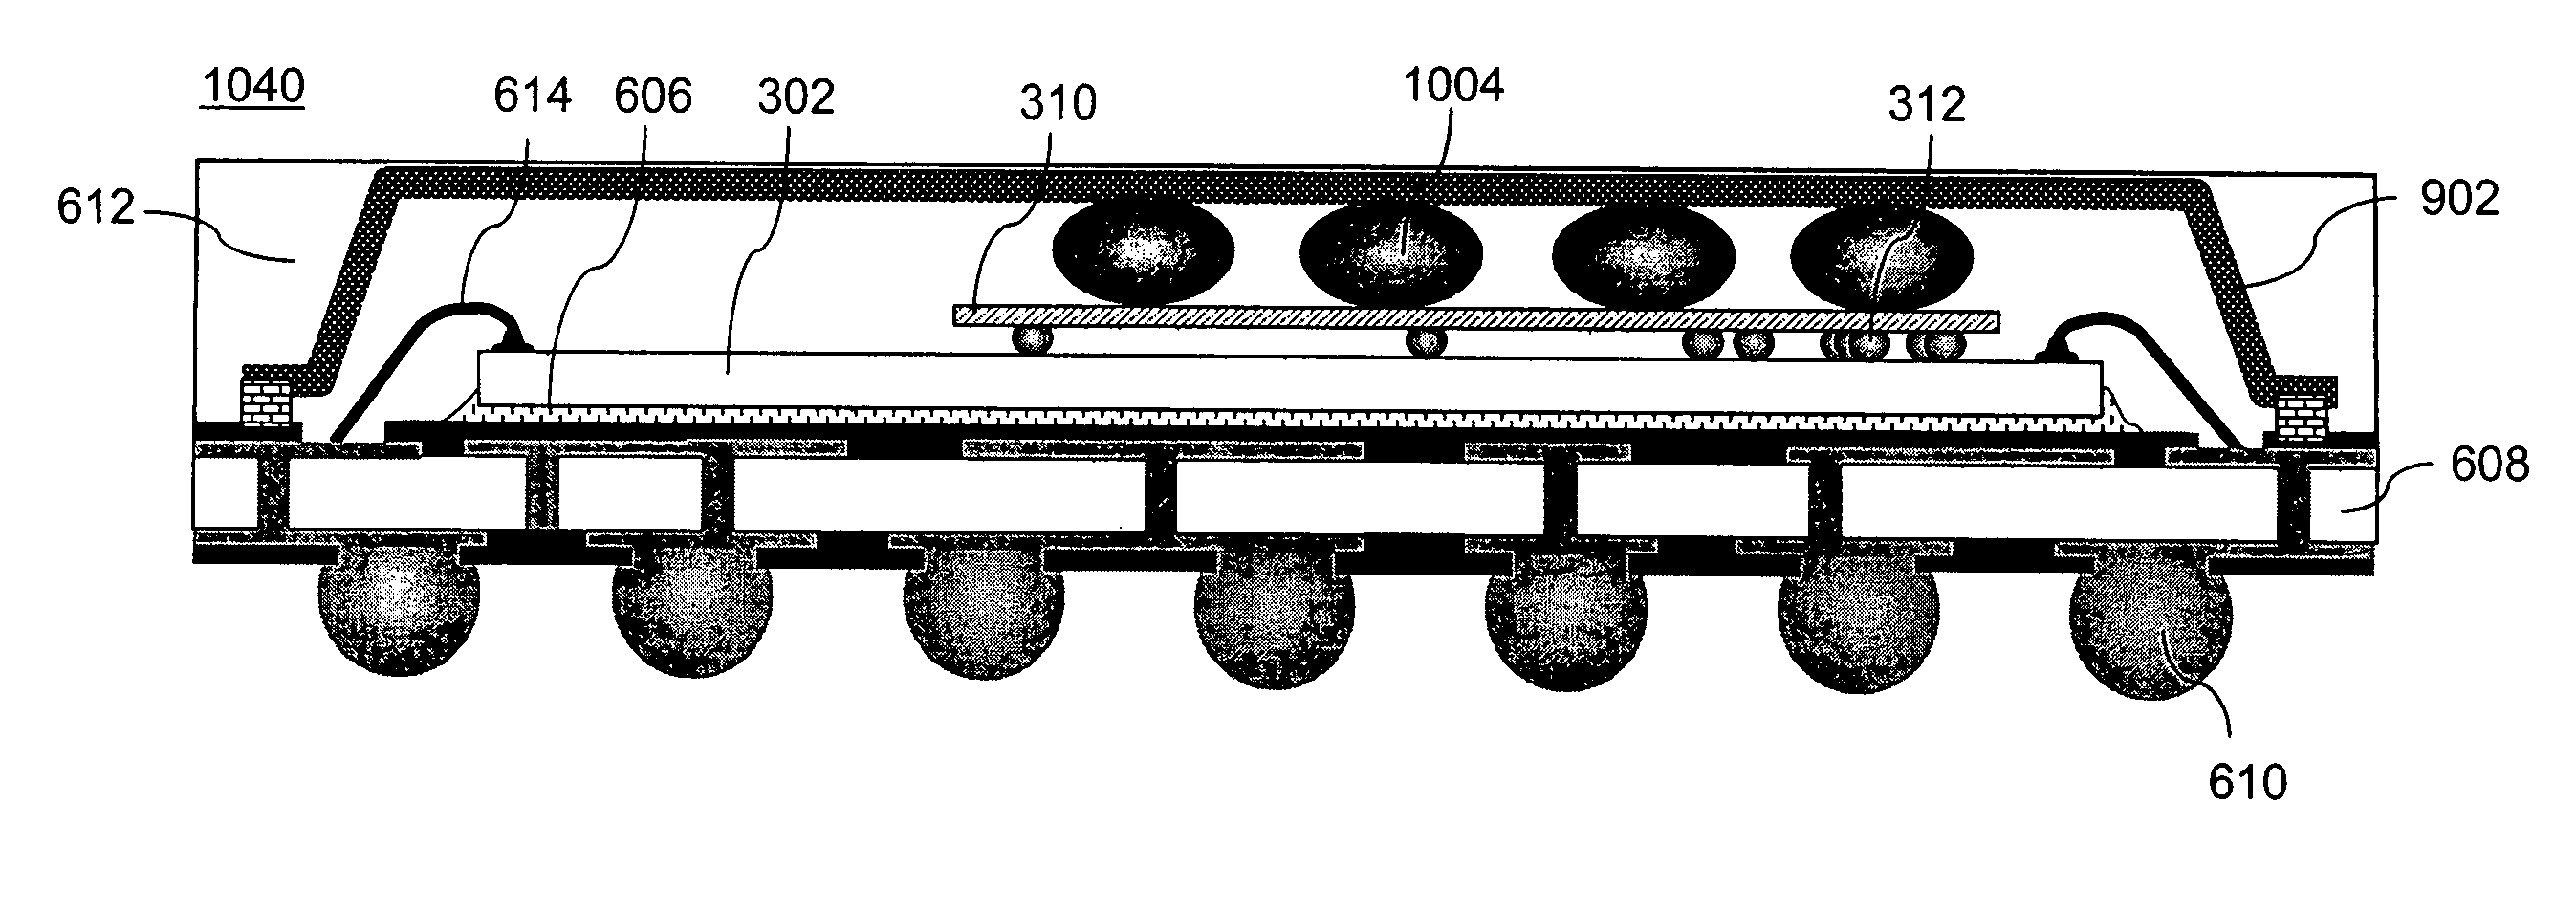 Method and apparatus for cooling semiconductor device hot blocks and large scale integrated circuit (IC) using integrated interposer for IC packages